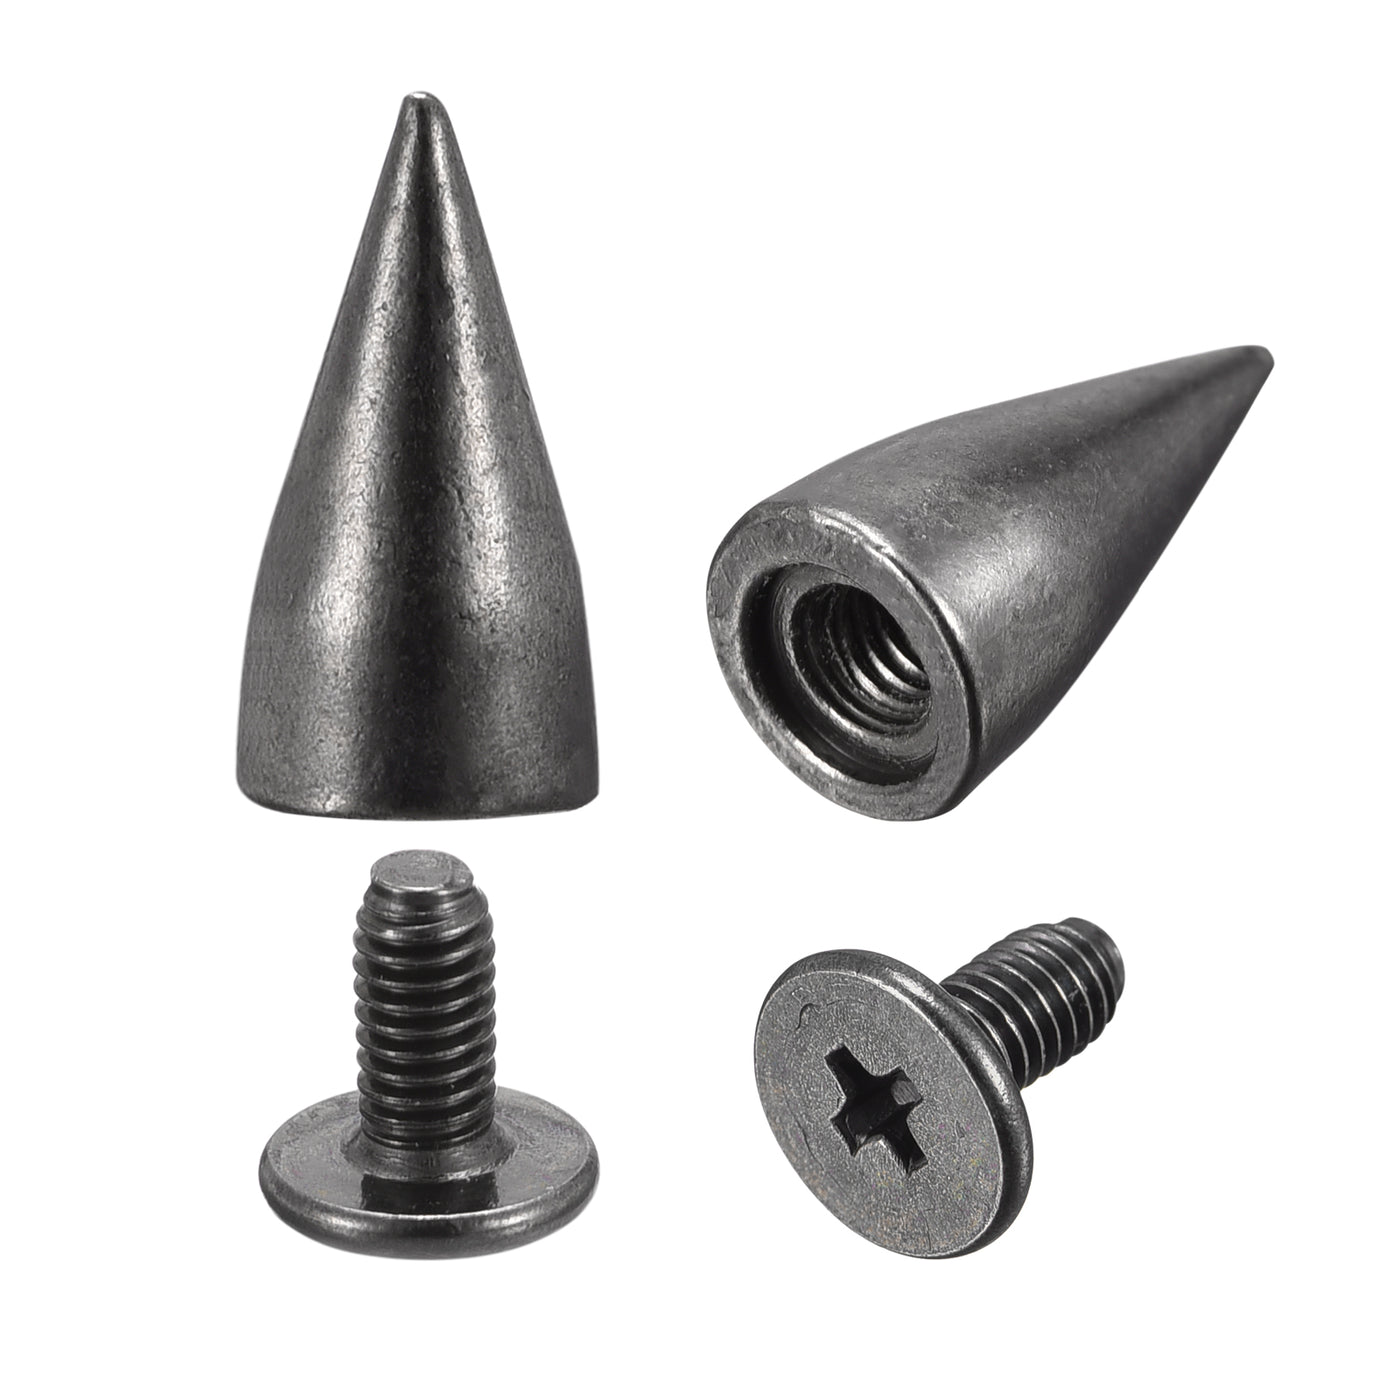 Uxcell Uxcell 7x13.5mm Screw Back Stud Rivets Spikes Zinc Alloy for DIY Silver Tone 100 Sets